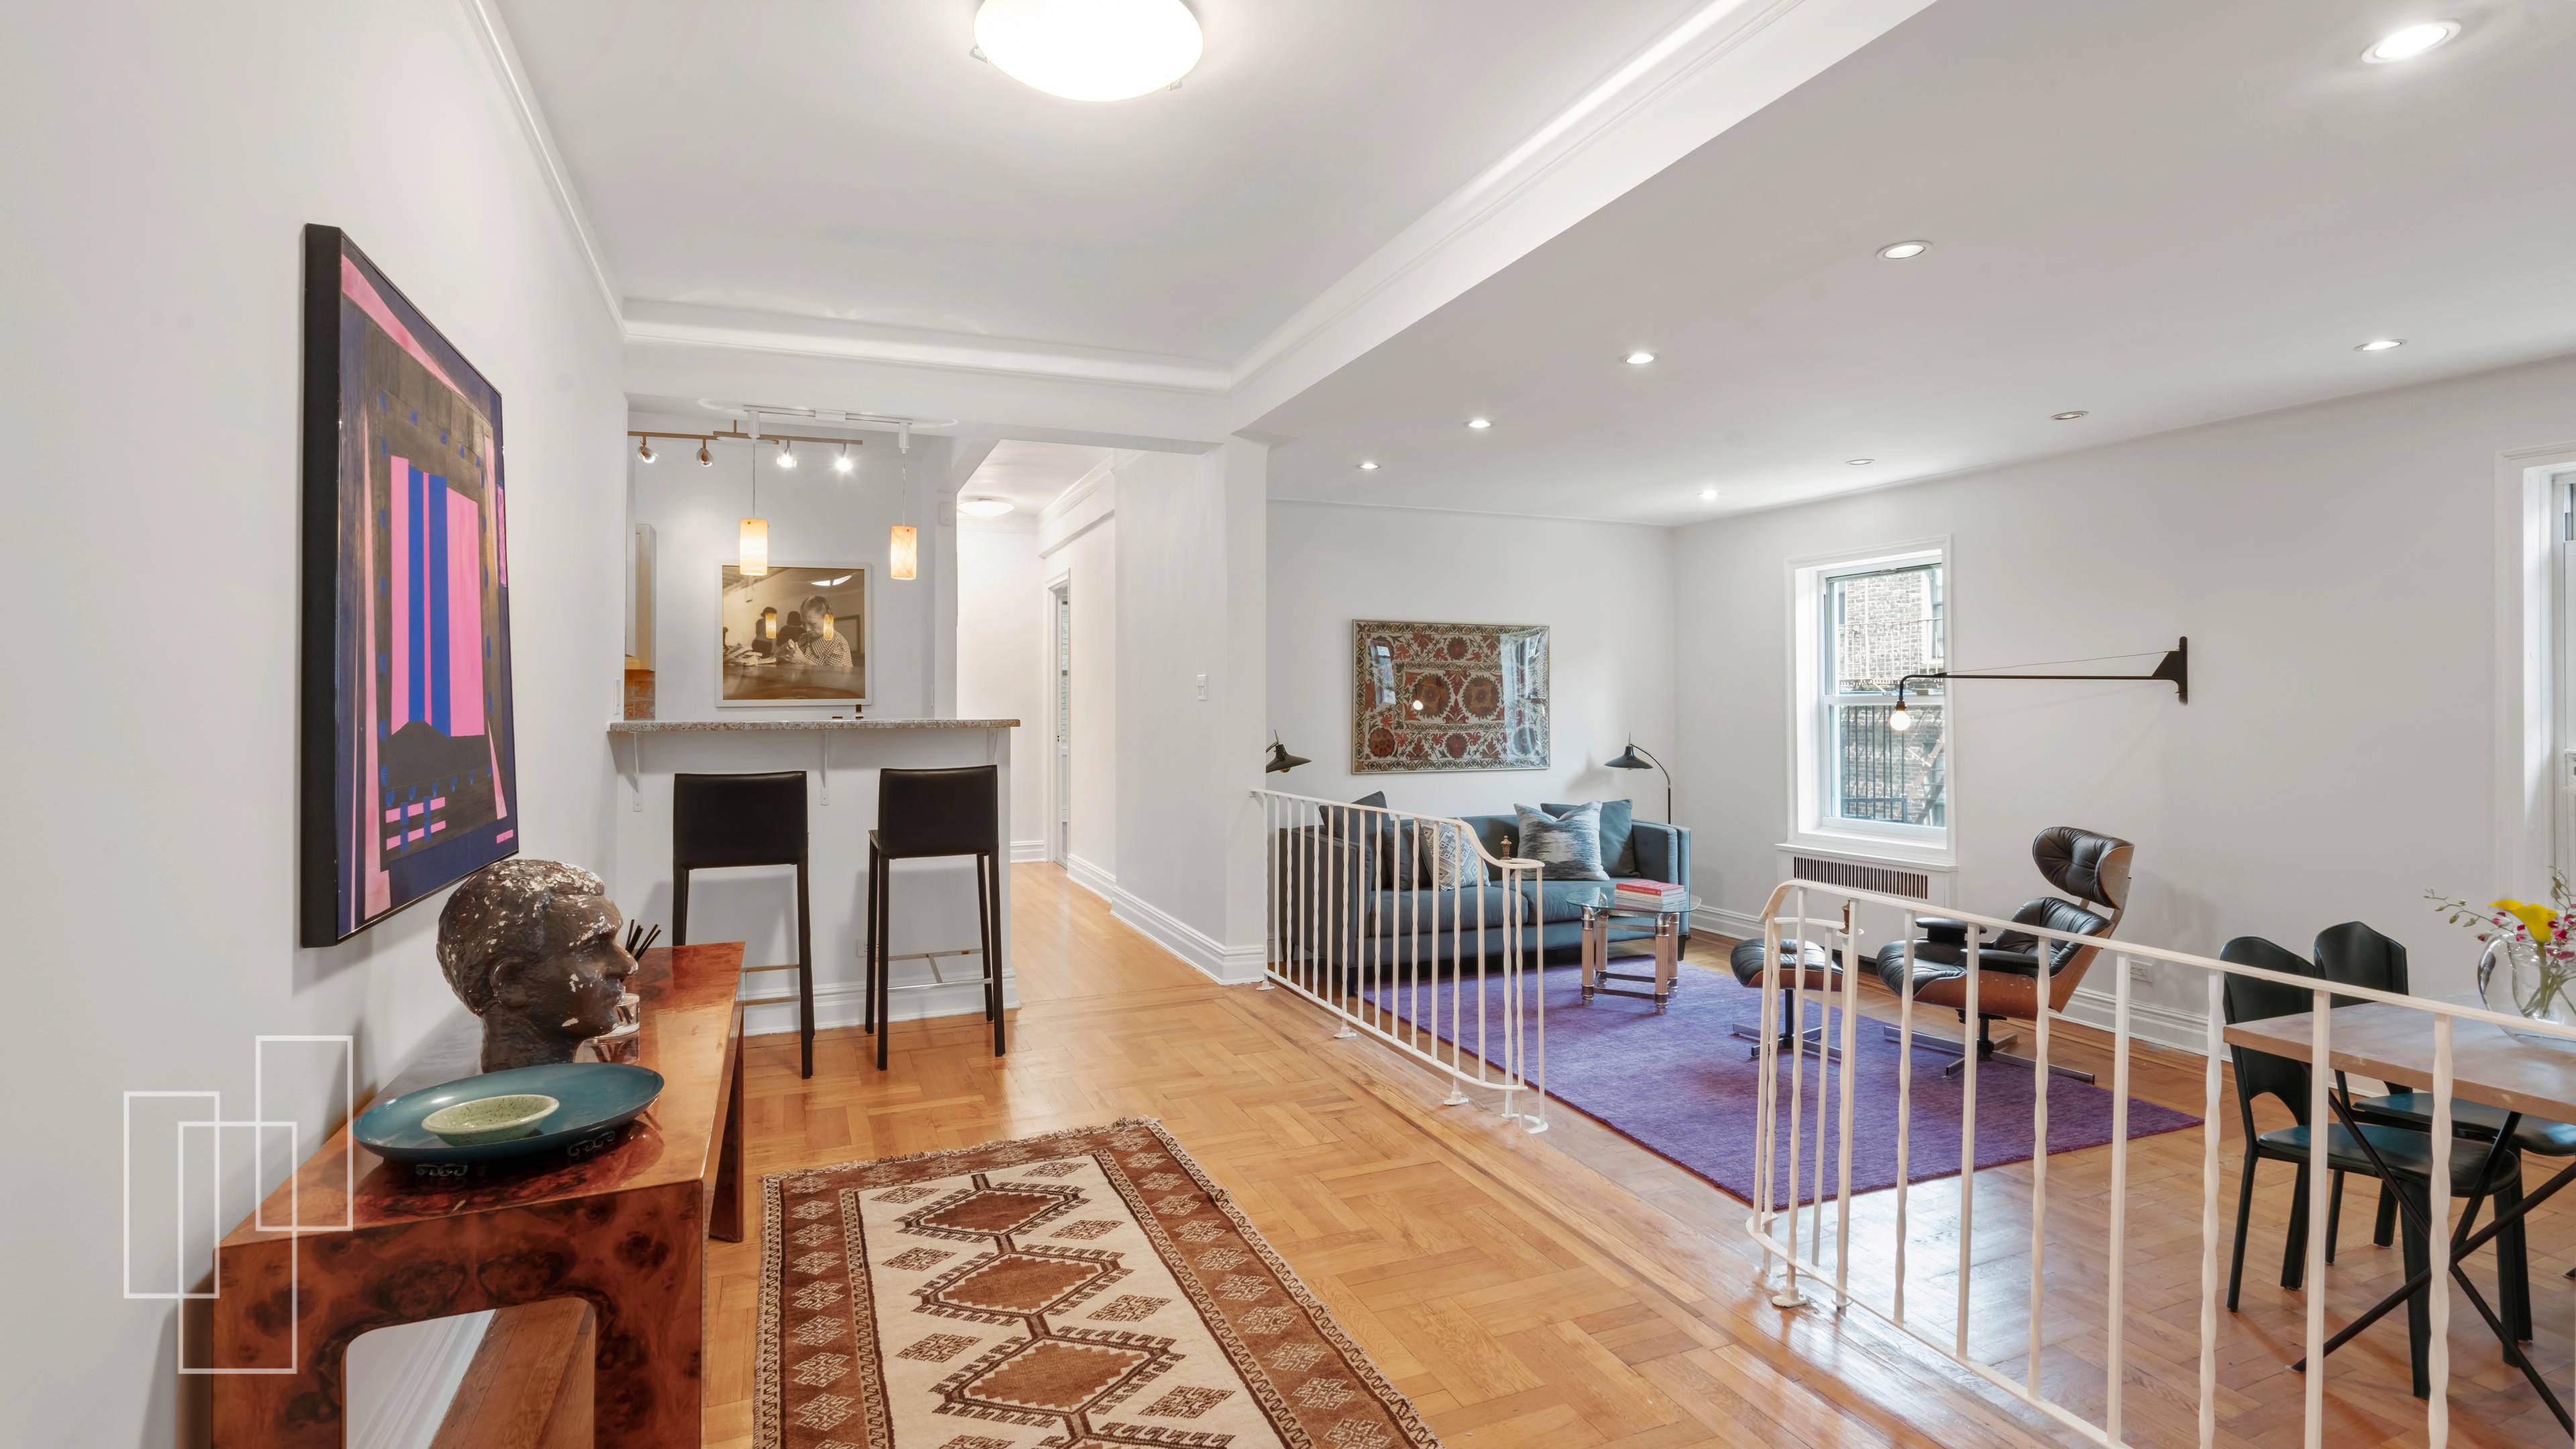 Contract Out Timeless elegance, generous proportions, and graceful flow characterize this corner pre war two bedroom co op with three exposures.